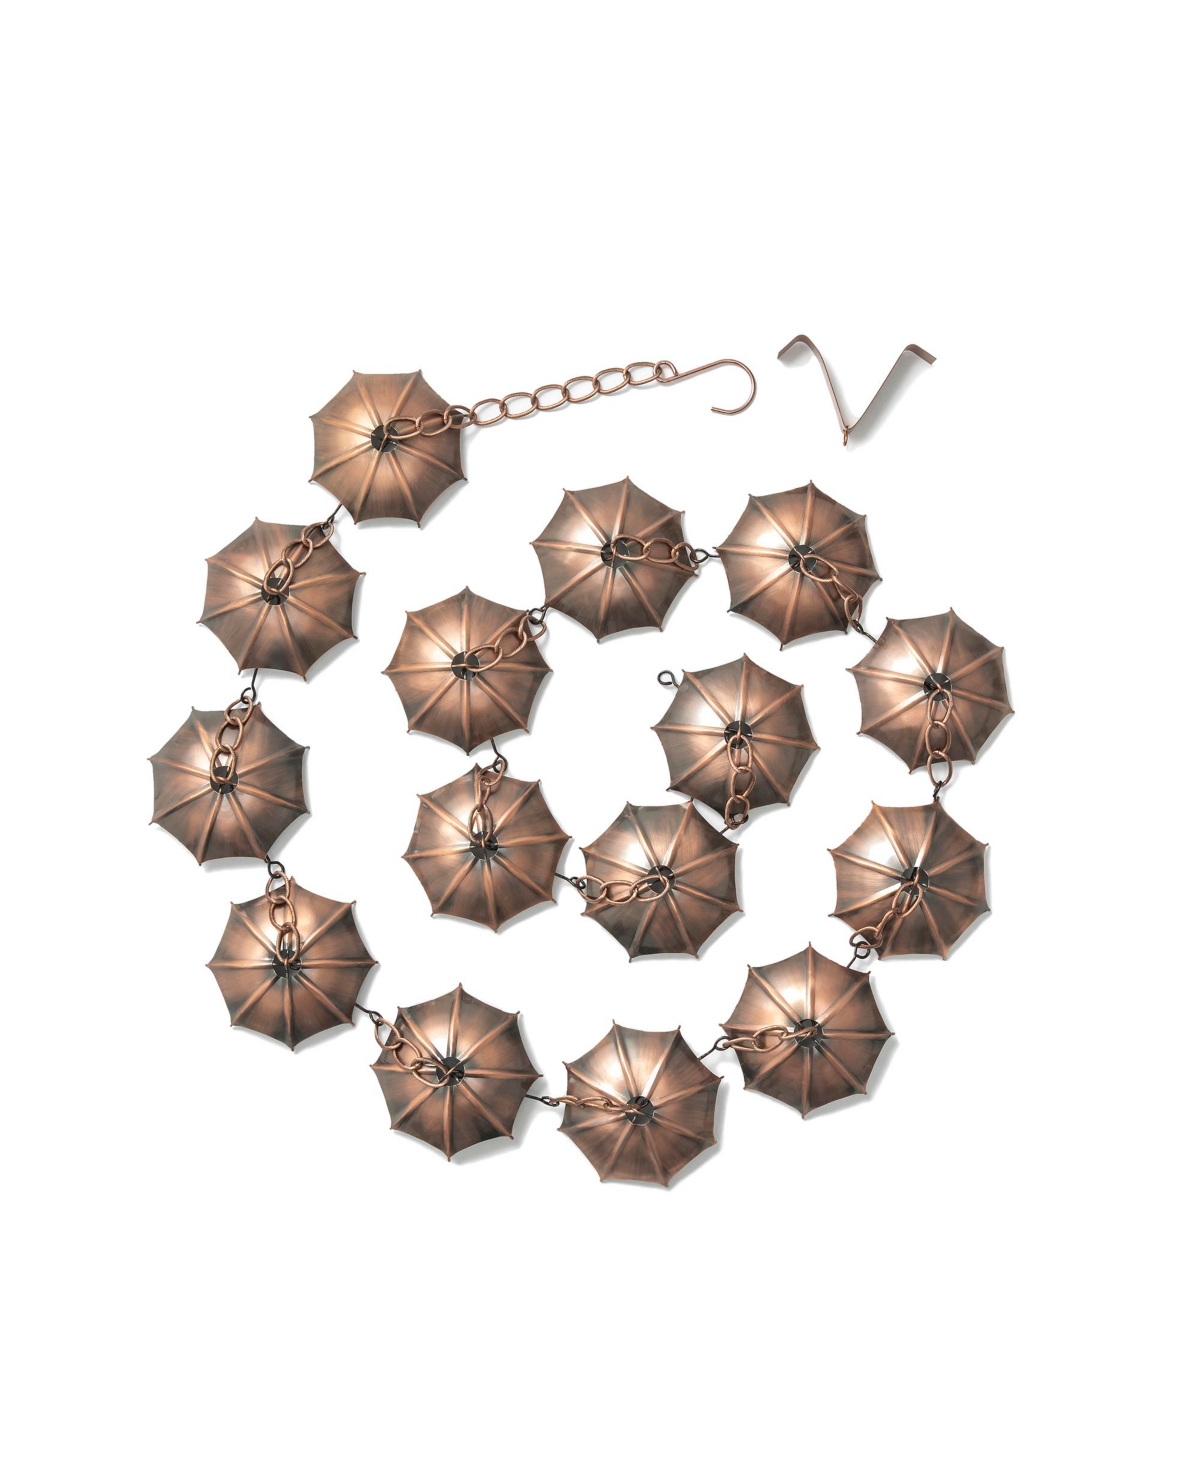 8.5' Faux Copper Umbrella Shaped Rain Chain with V-Shaped Gutter Clip - Gold